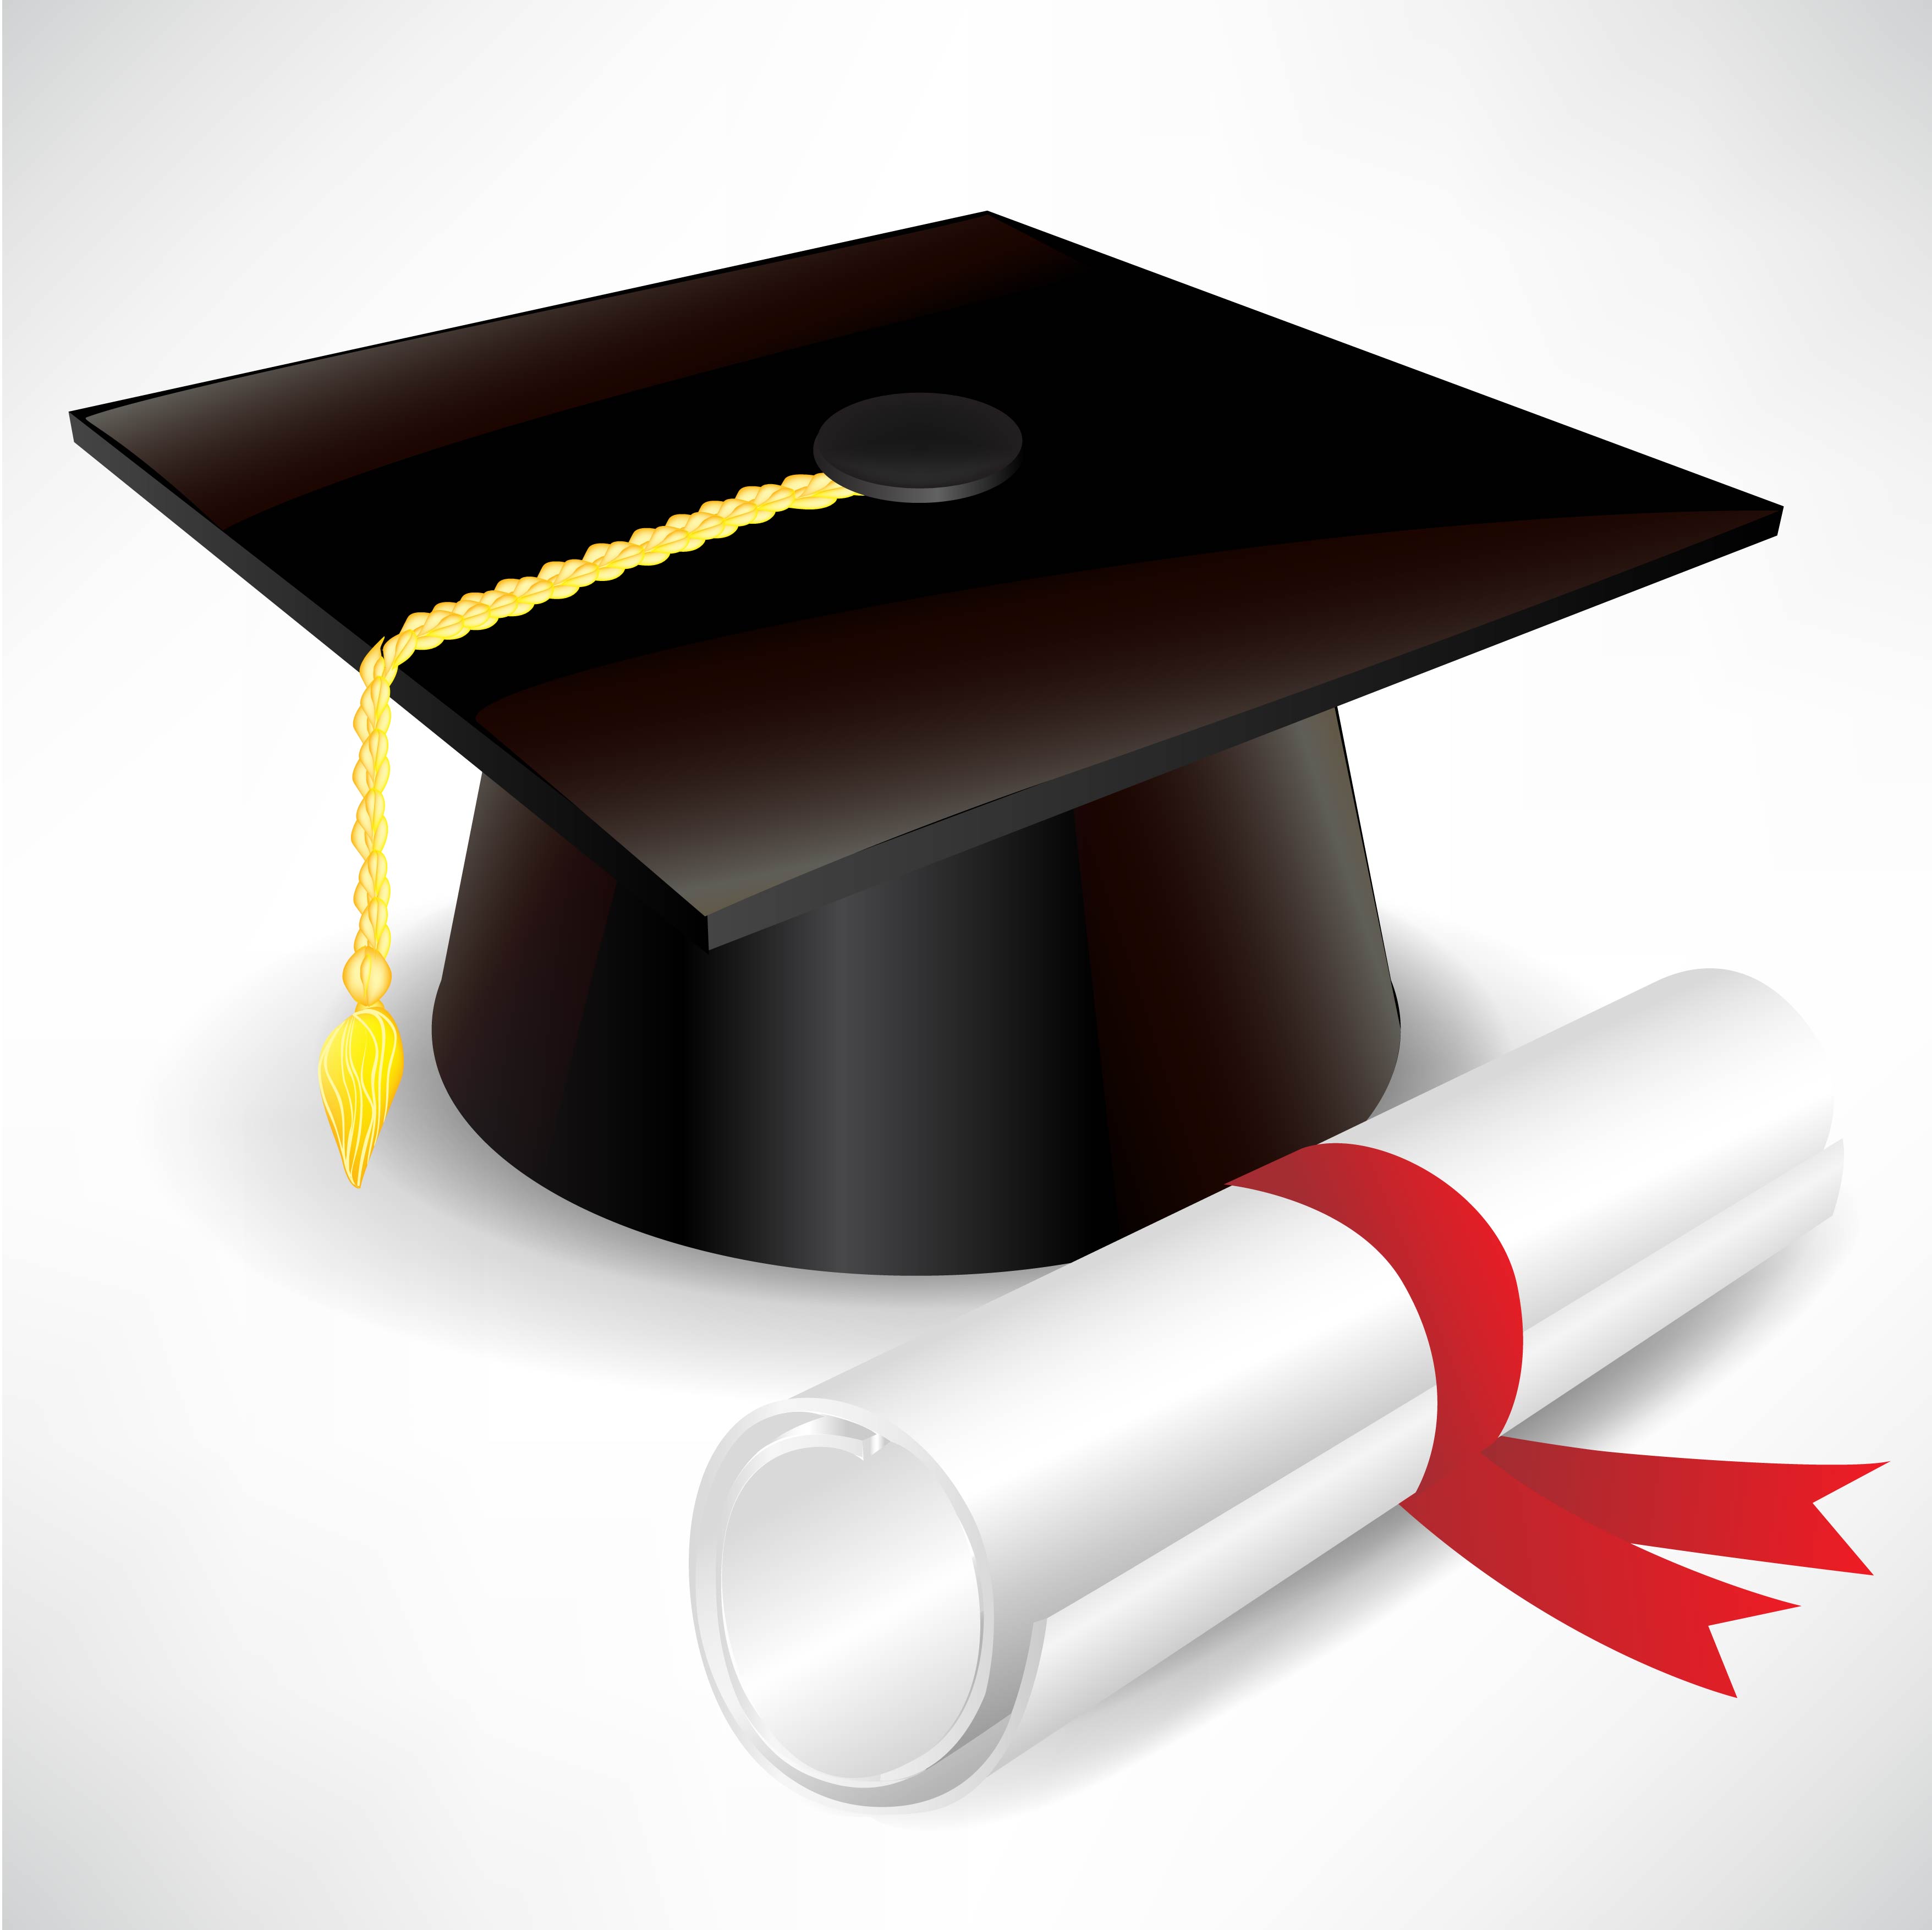 Cap And Diploma Images - Cliparts.co